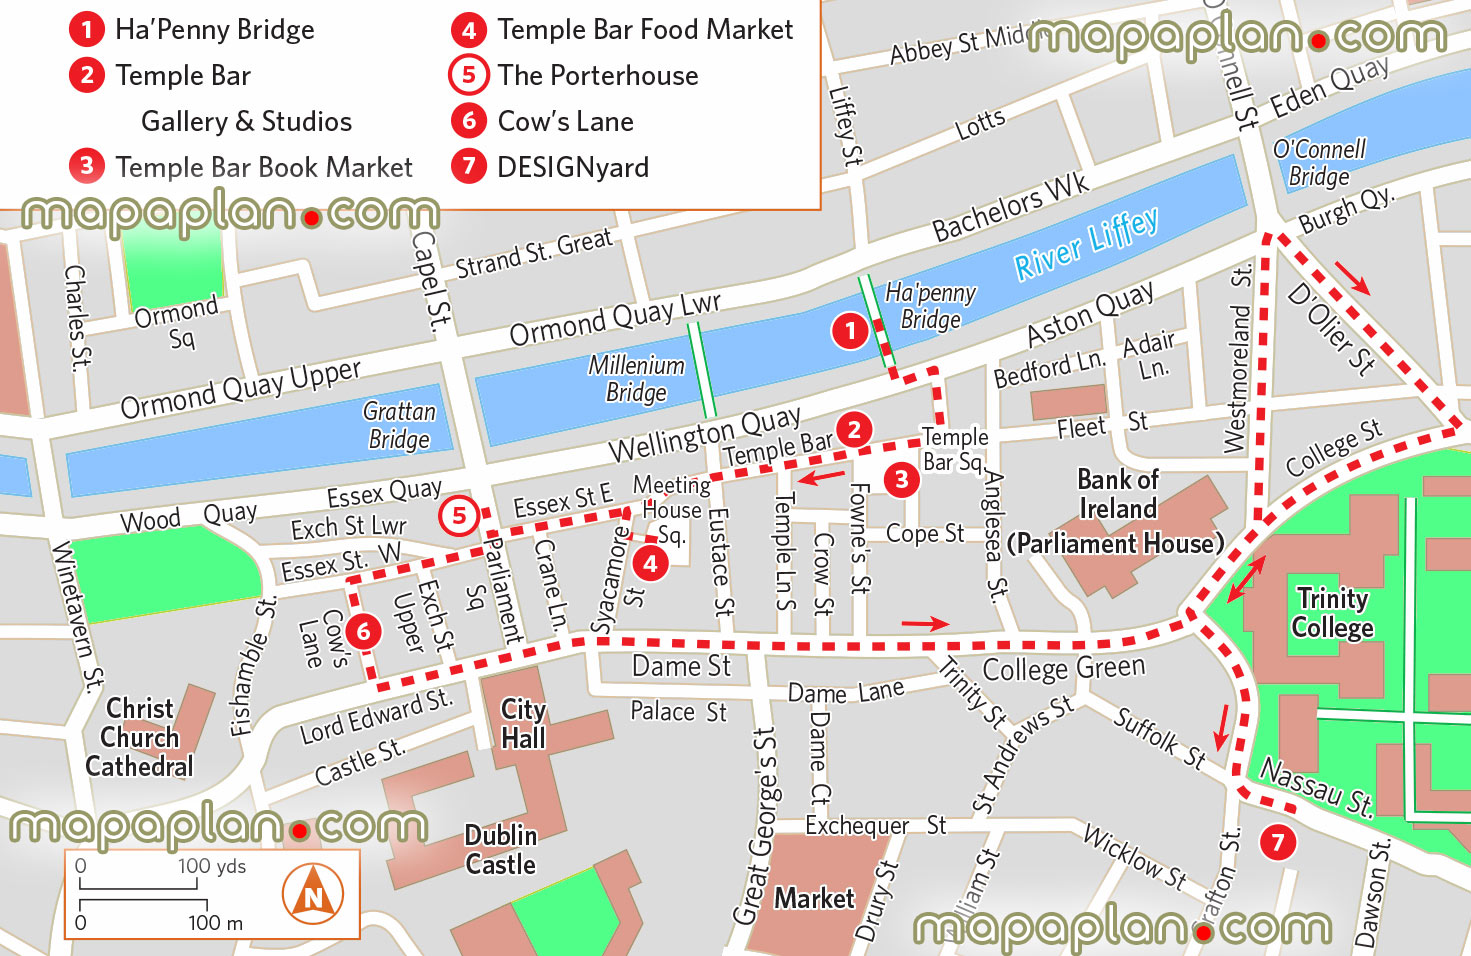 temple bar interactive walking print before your trip district area outline layout best locations visits Dublin Top tourist attractions map